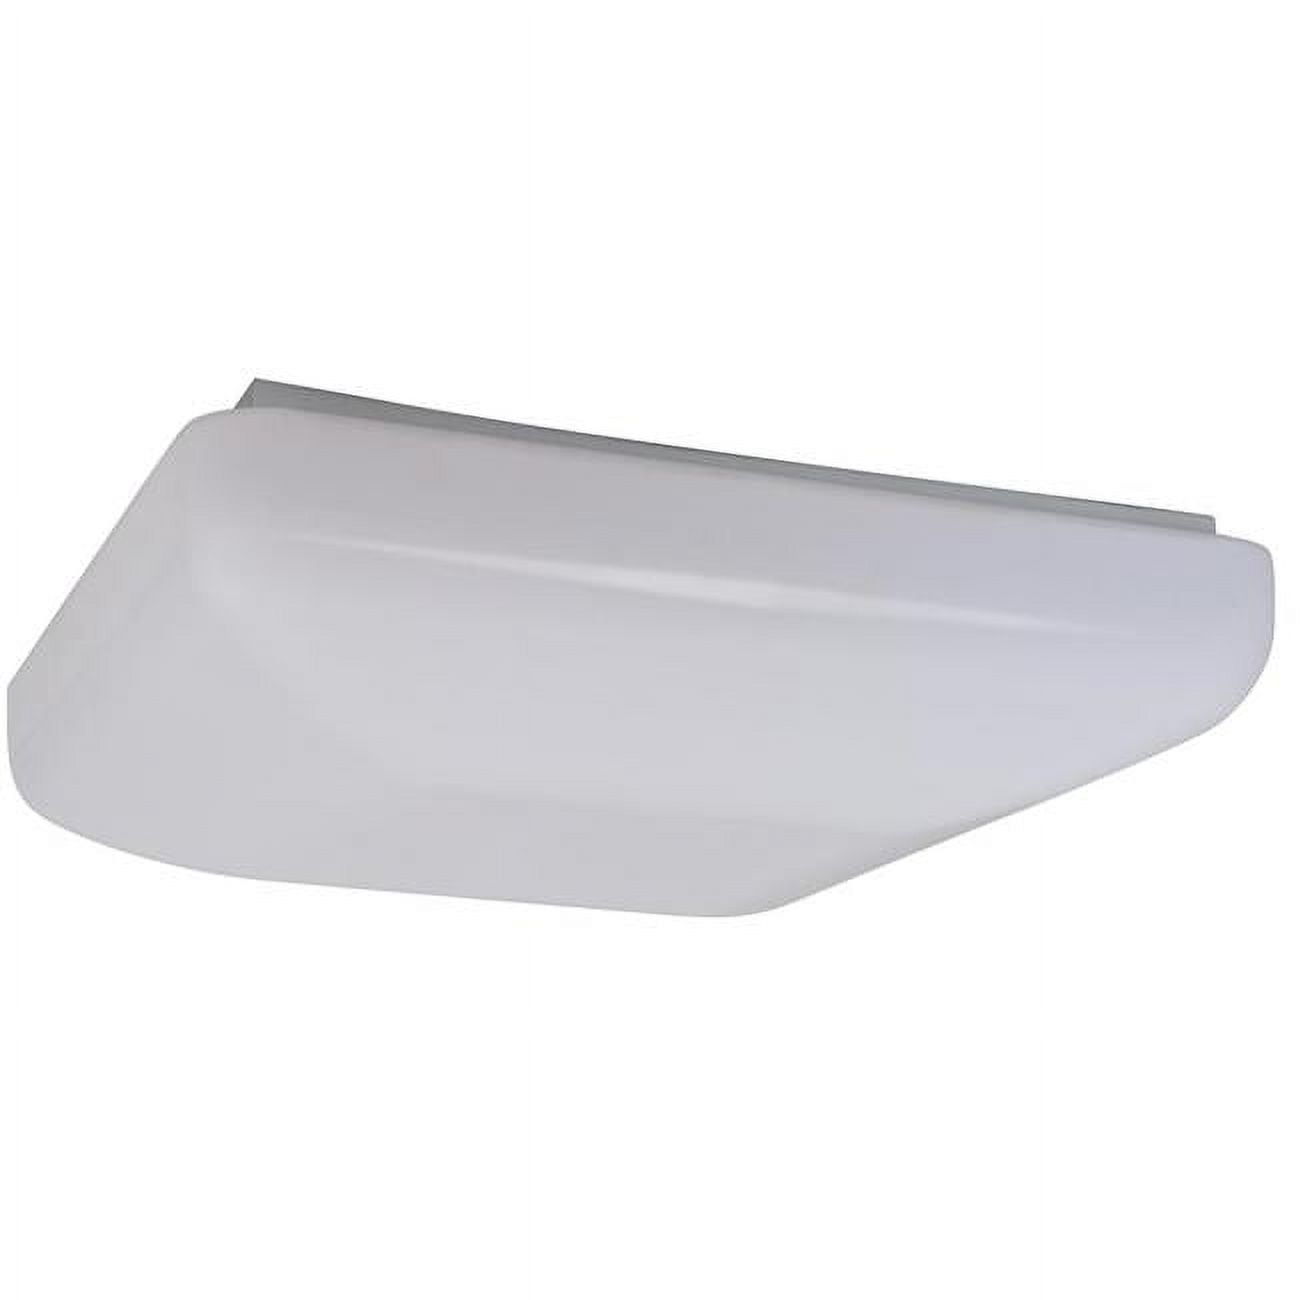 Led-s001l 12.5 X 3.5 In. Led Ceiling Fixture Square - White